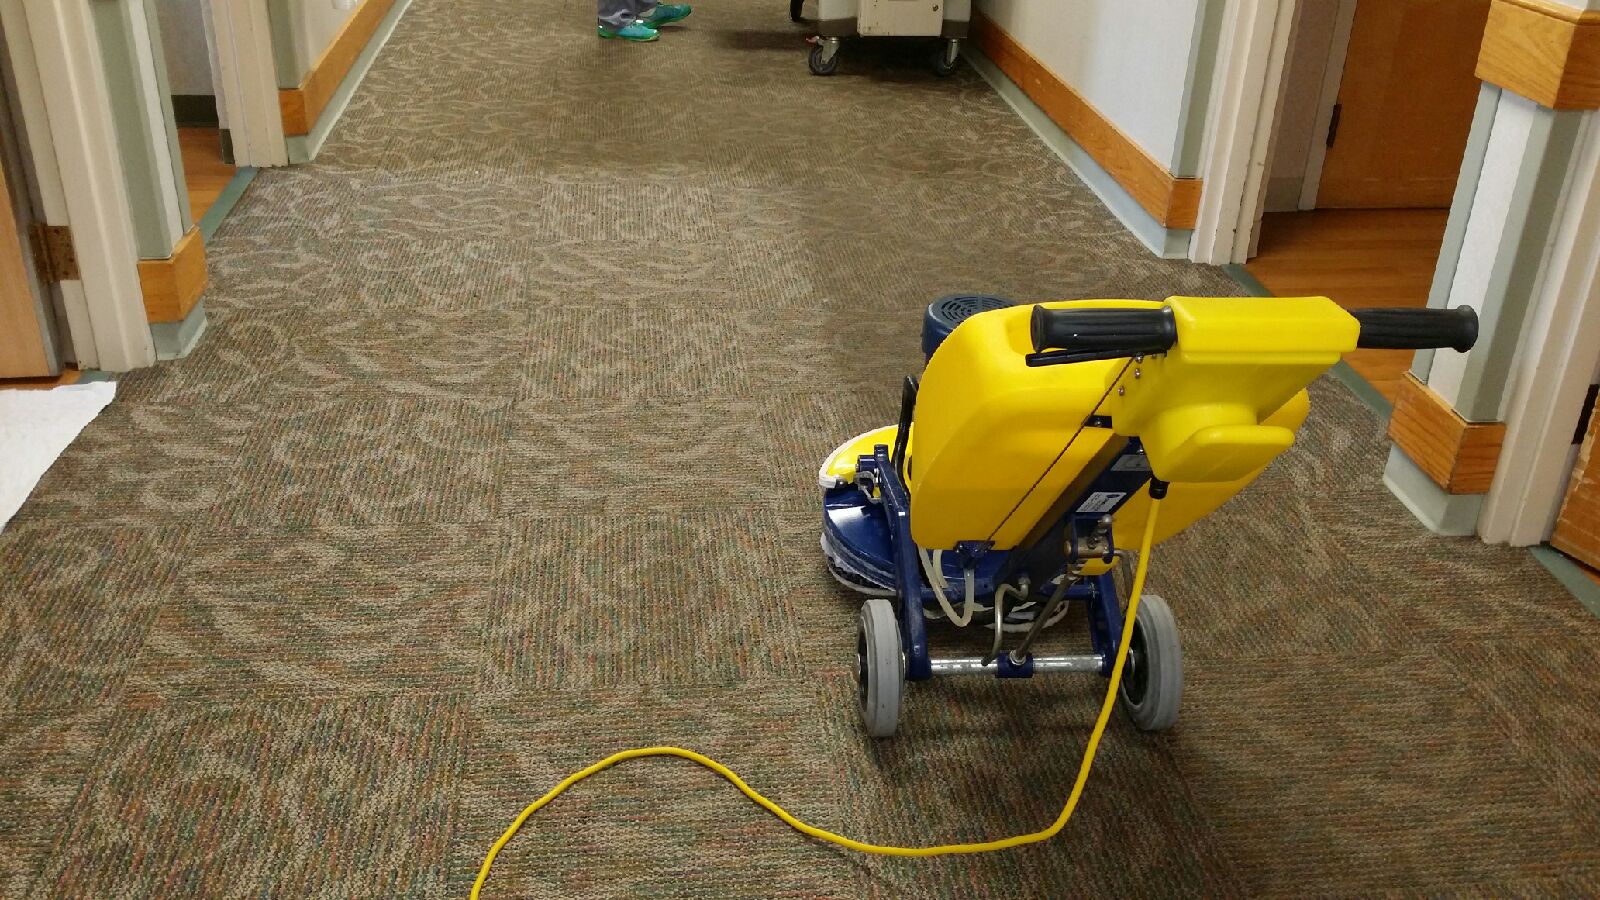 Carpet Cleaning Rug Cleaning Hinsdale Il Koshgarian Rug Cleaners Inc 630 686 1869